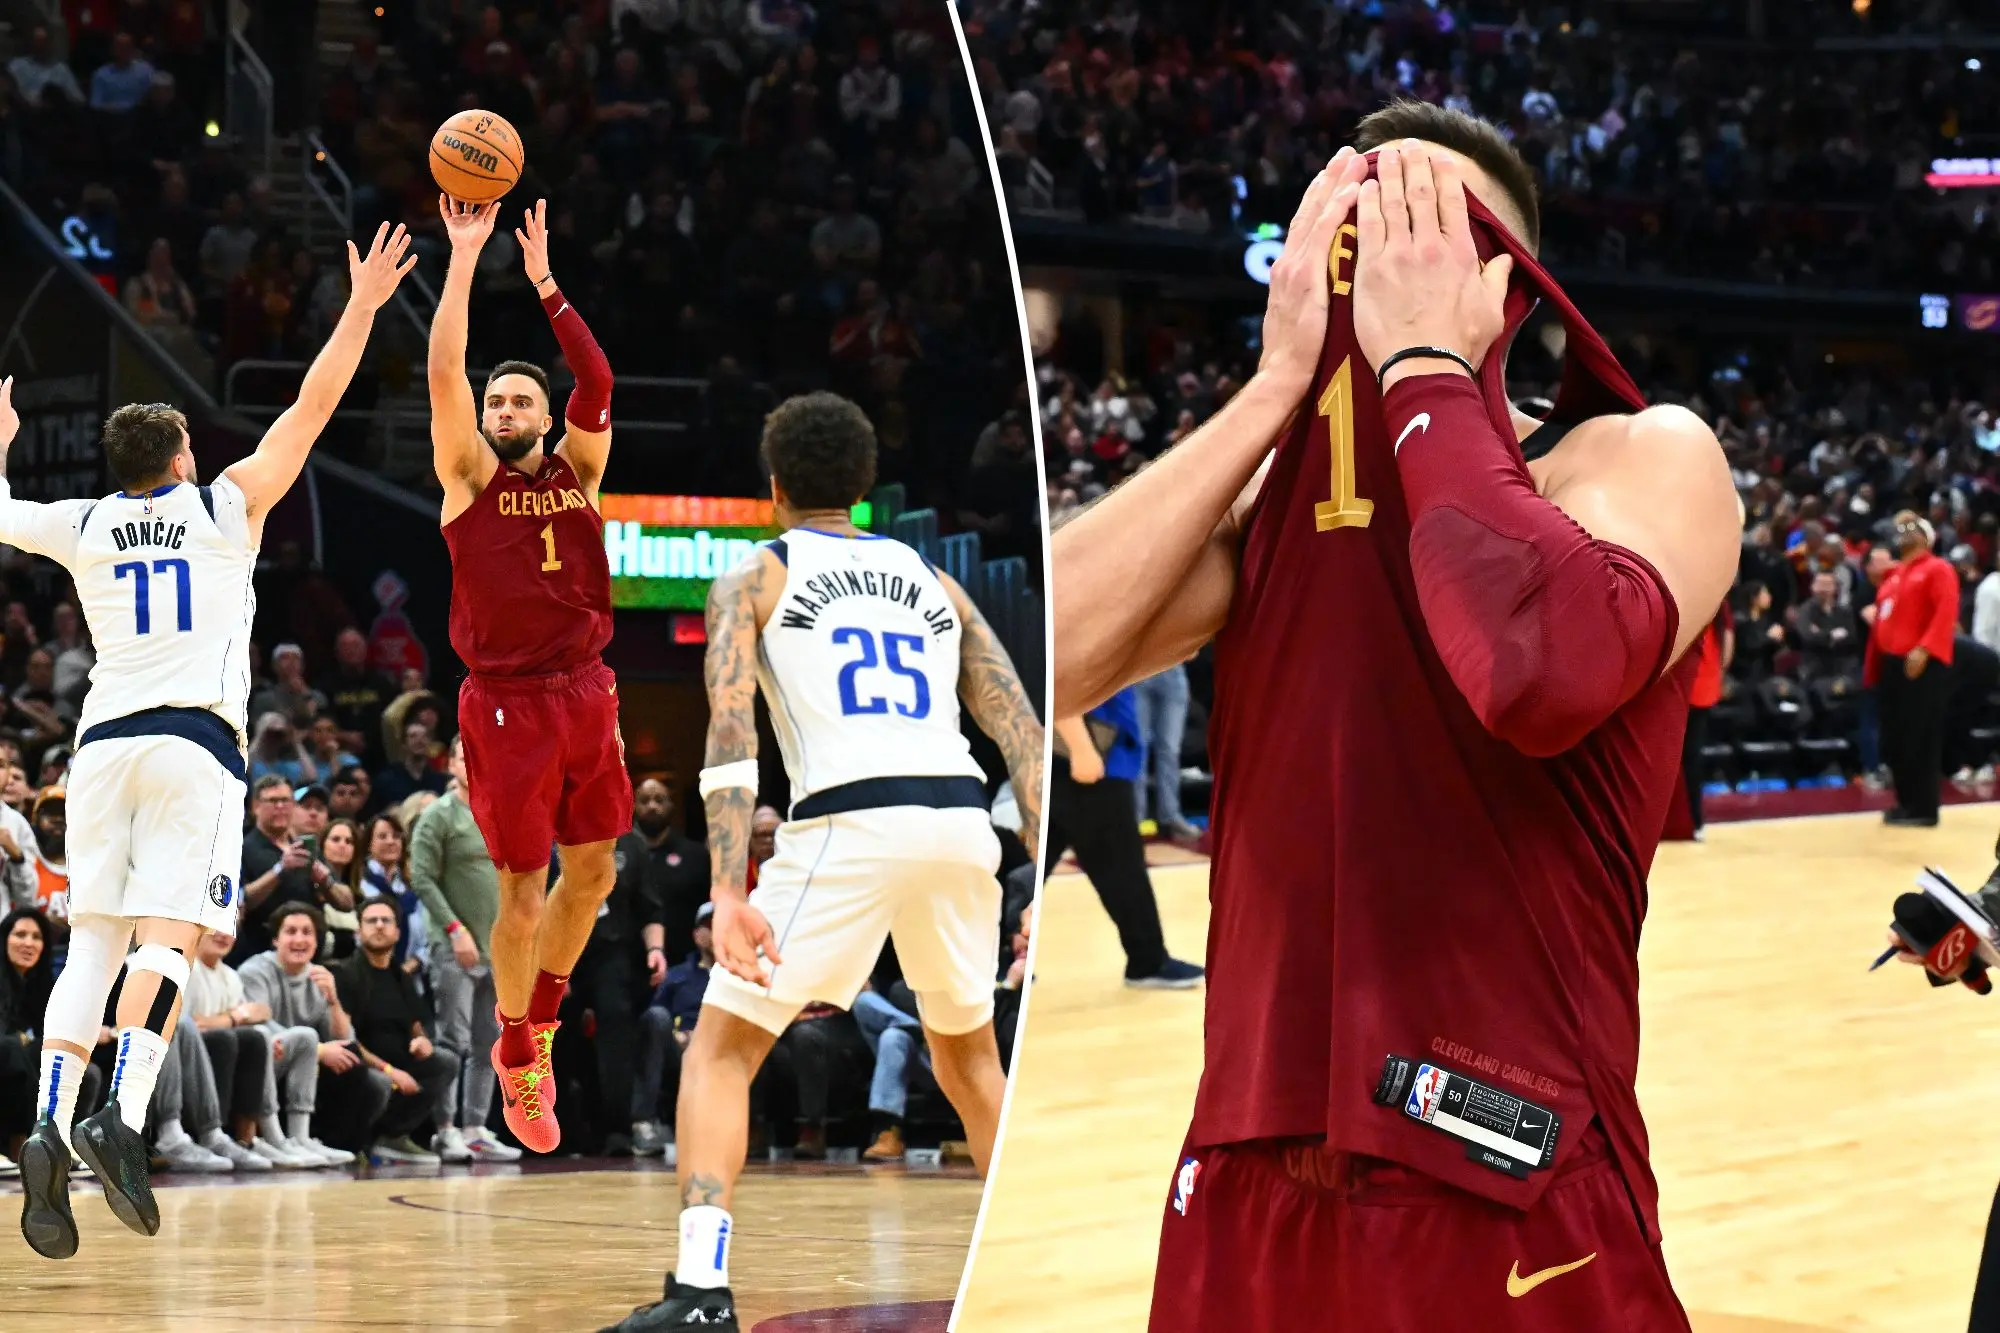 "Travis Kelce Triumphs Over Patrick Mahomes as Cleveland Cavaliers Deliver Jaw-Dropping Half-Court Buzzer Beater to Defeat Mahomes' Dallas Mavericks: 'Unbelievable!'"